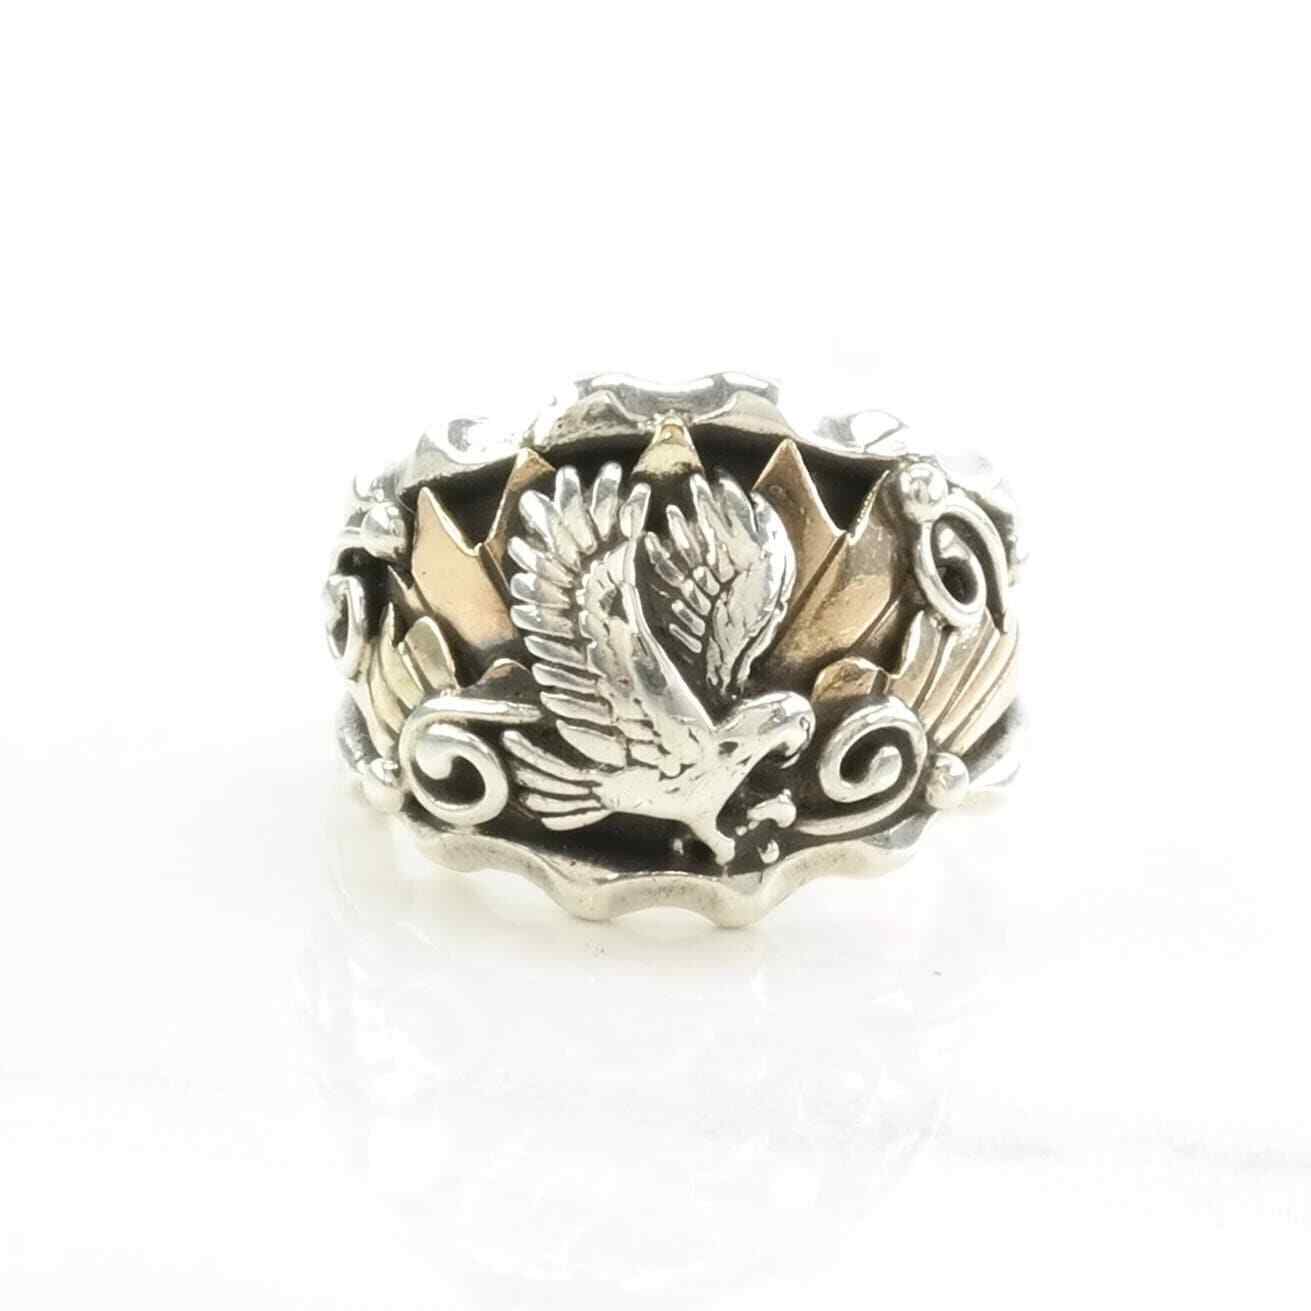 Vintage Native American Silver Ring Eagle Gold Toned Accent Sterling Size 10 3/4